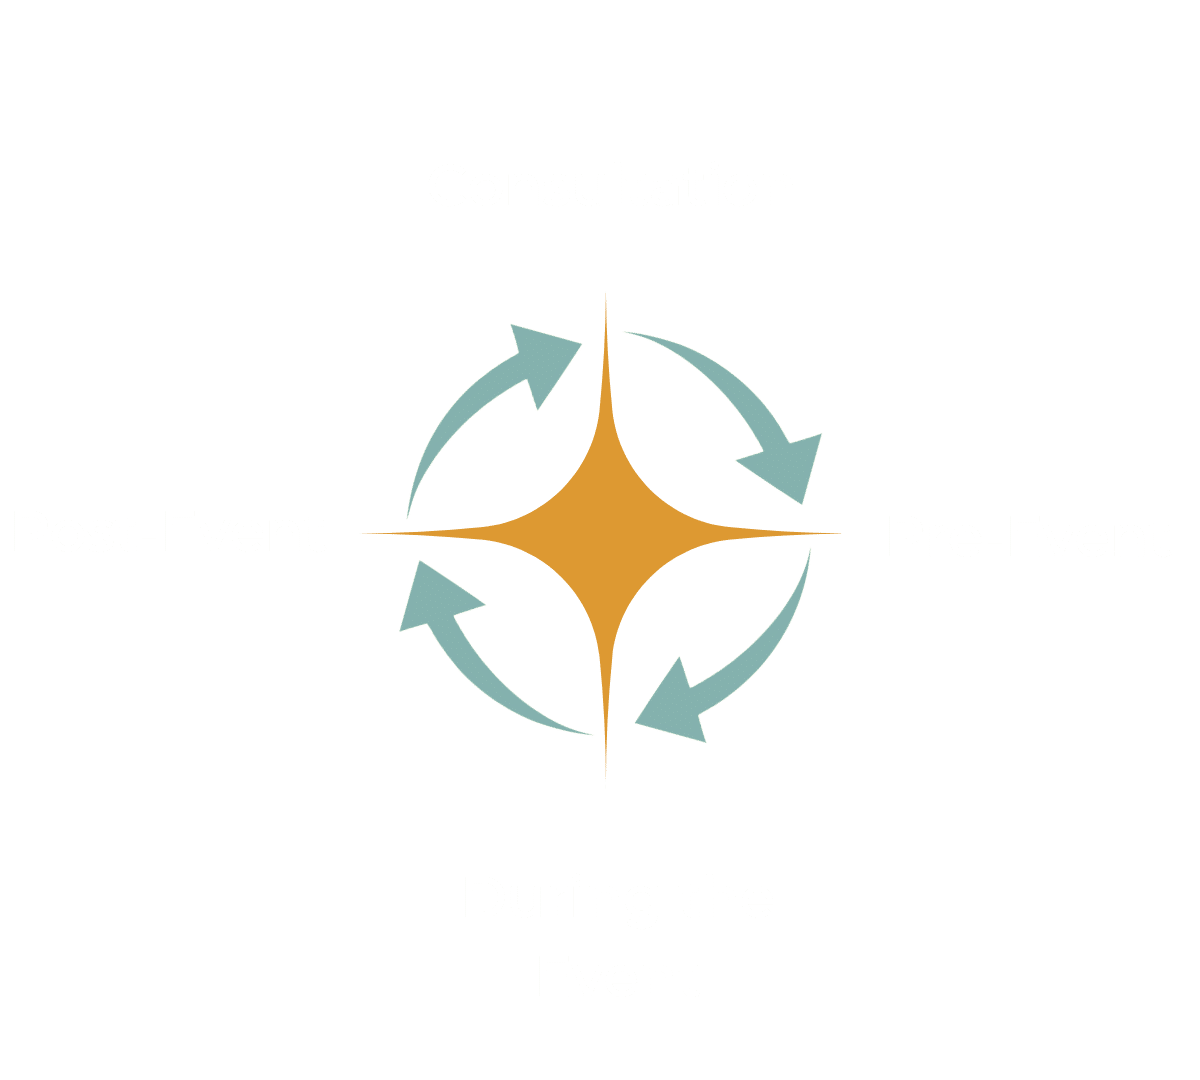 Circle Diagram of an Event